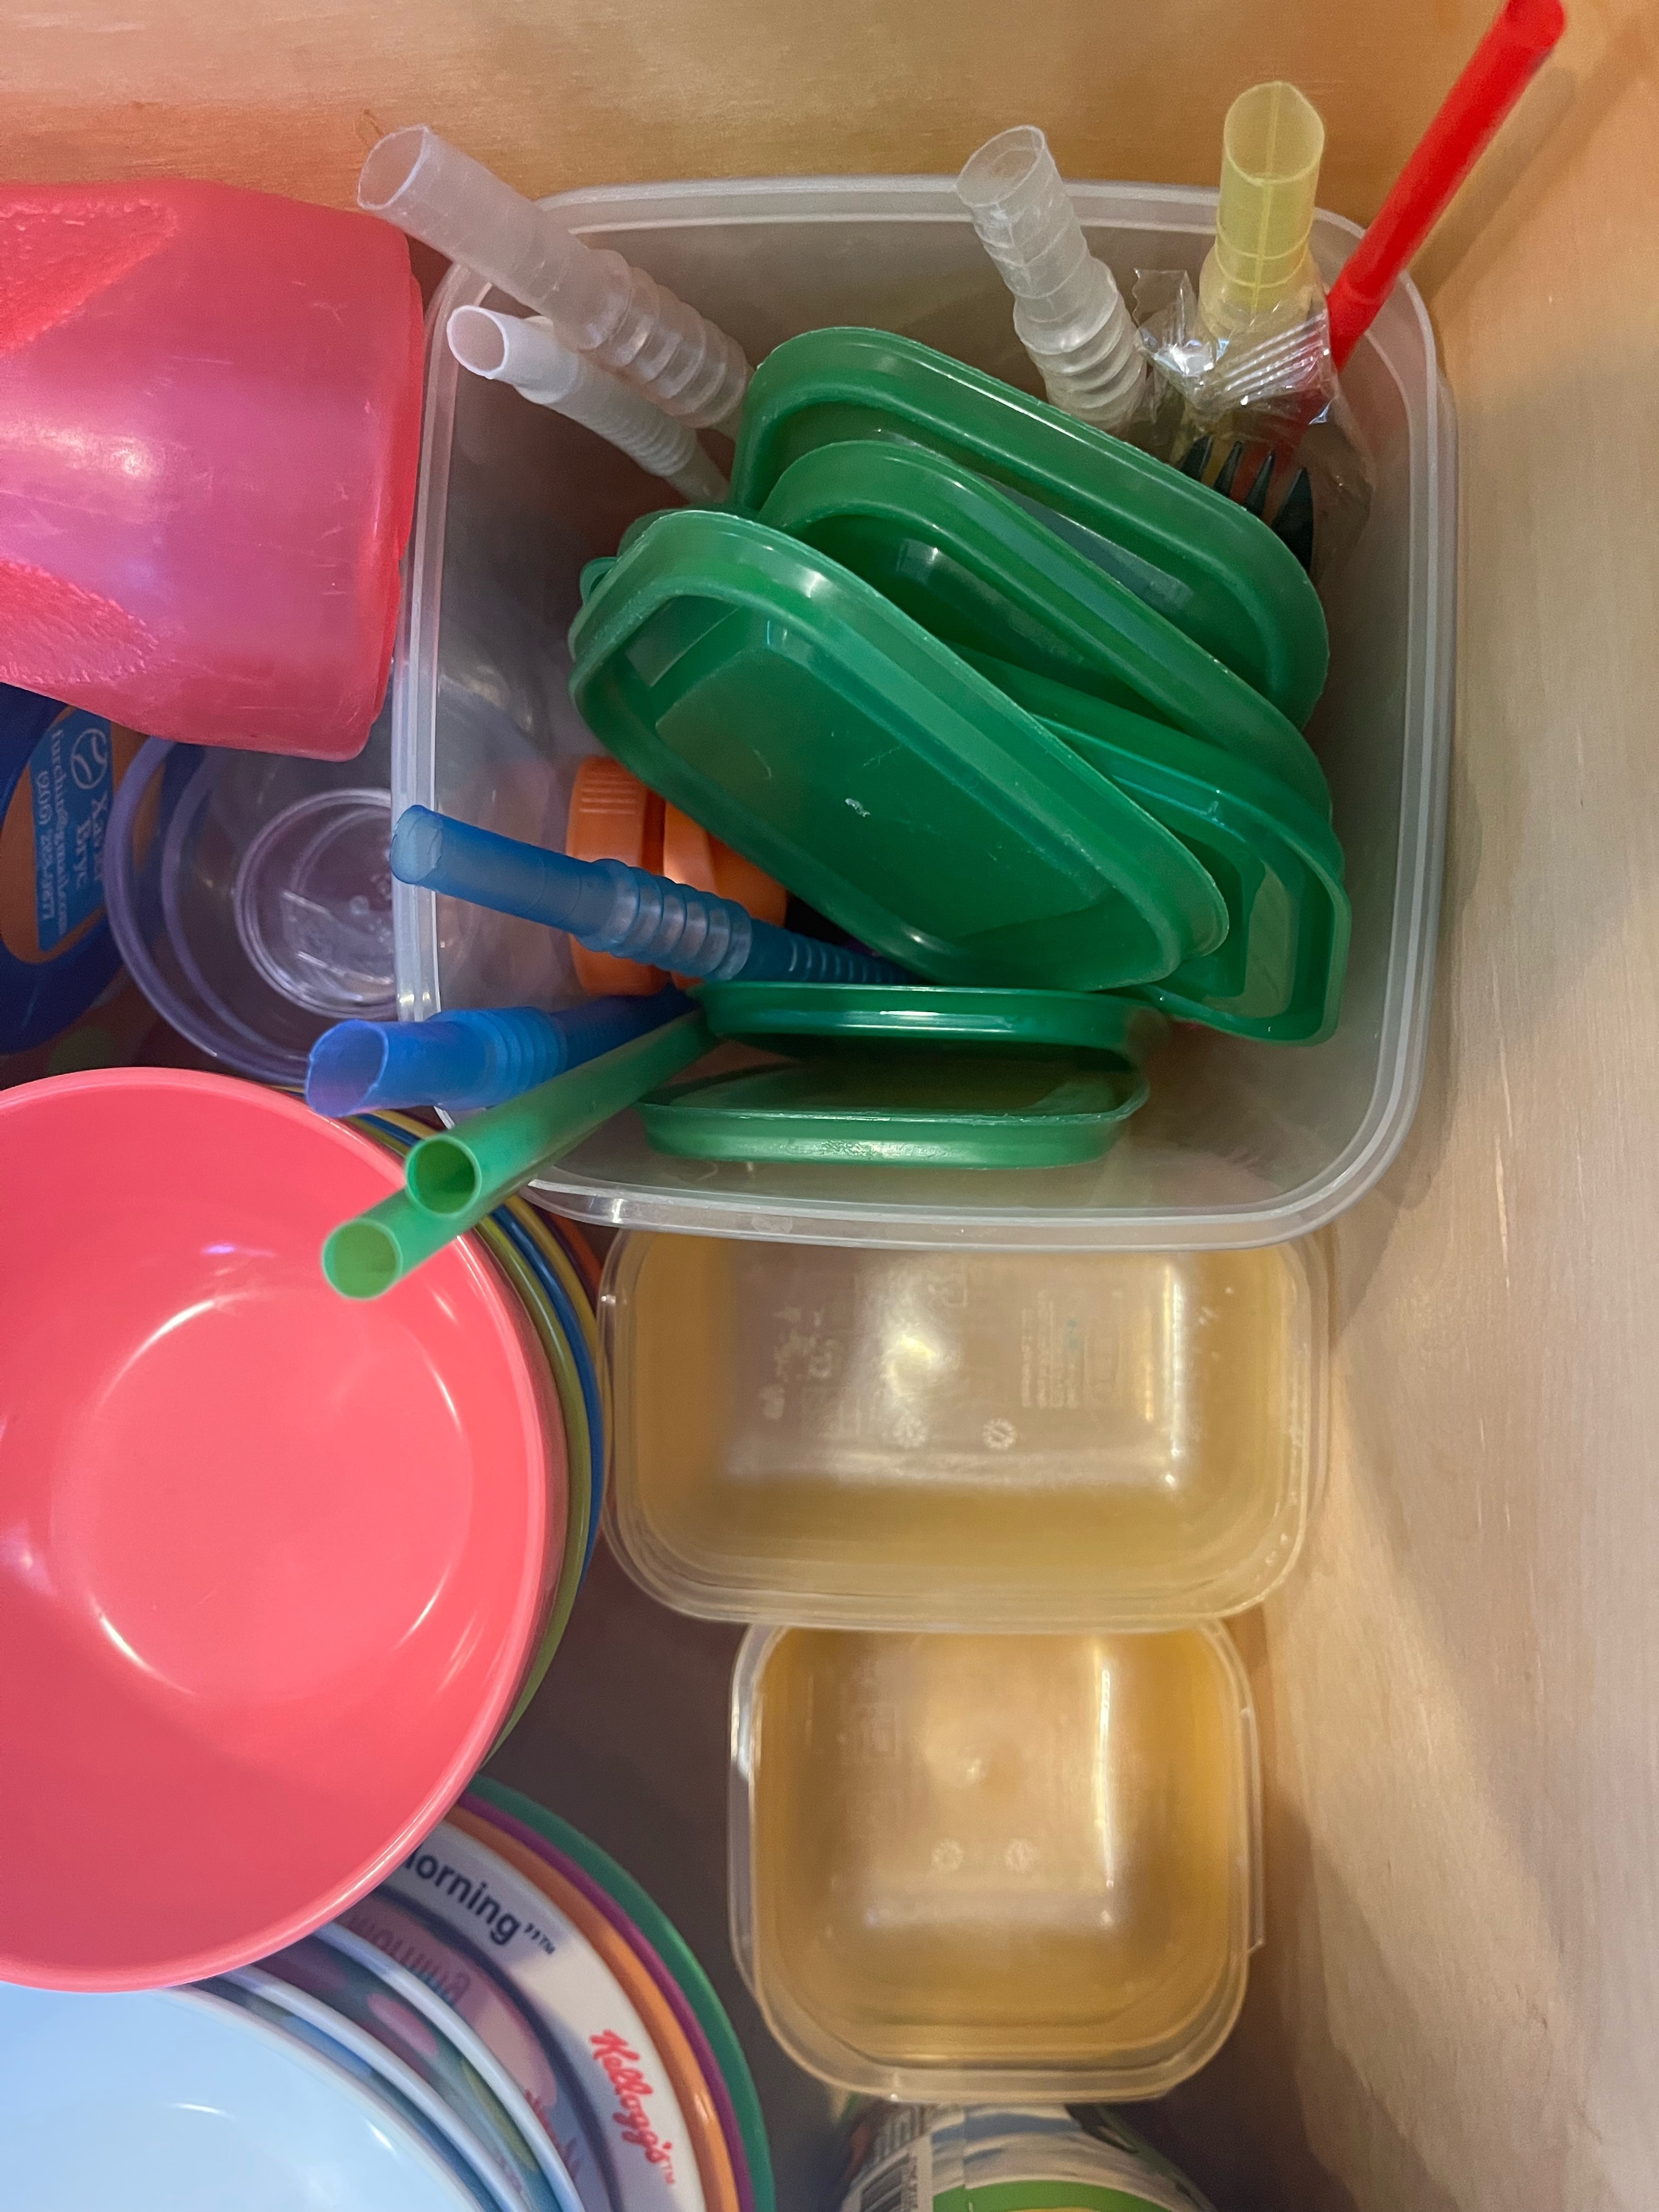 Kitchen drawer filled with IKEA Pruta food containers and lids with other brightly colored dishes